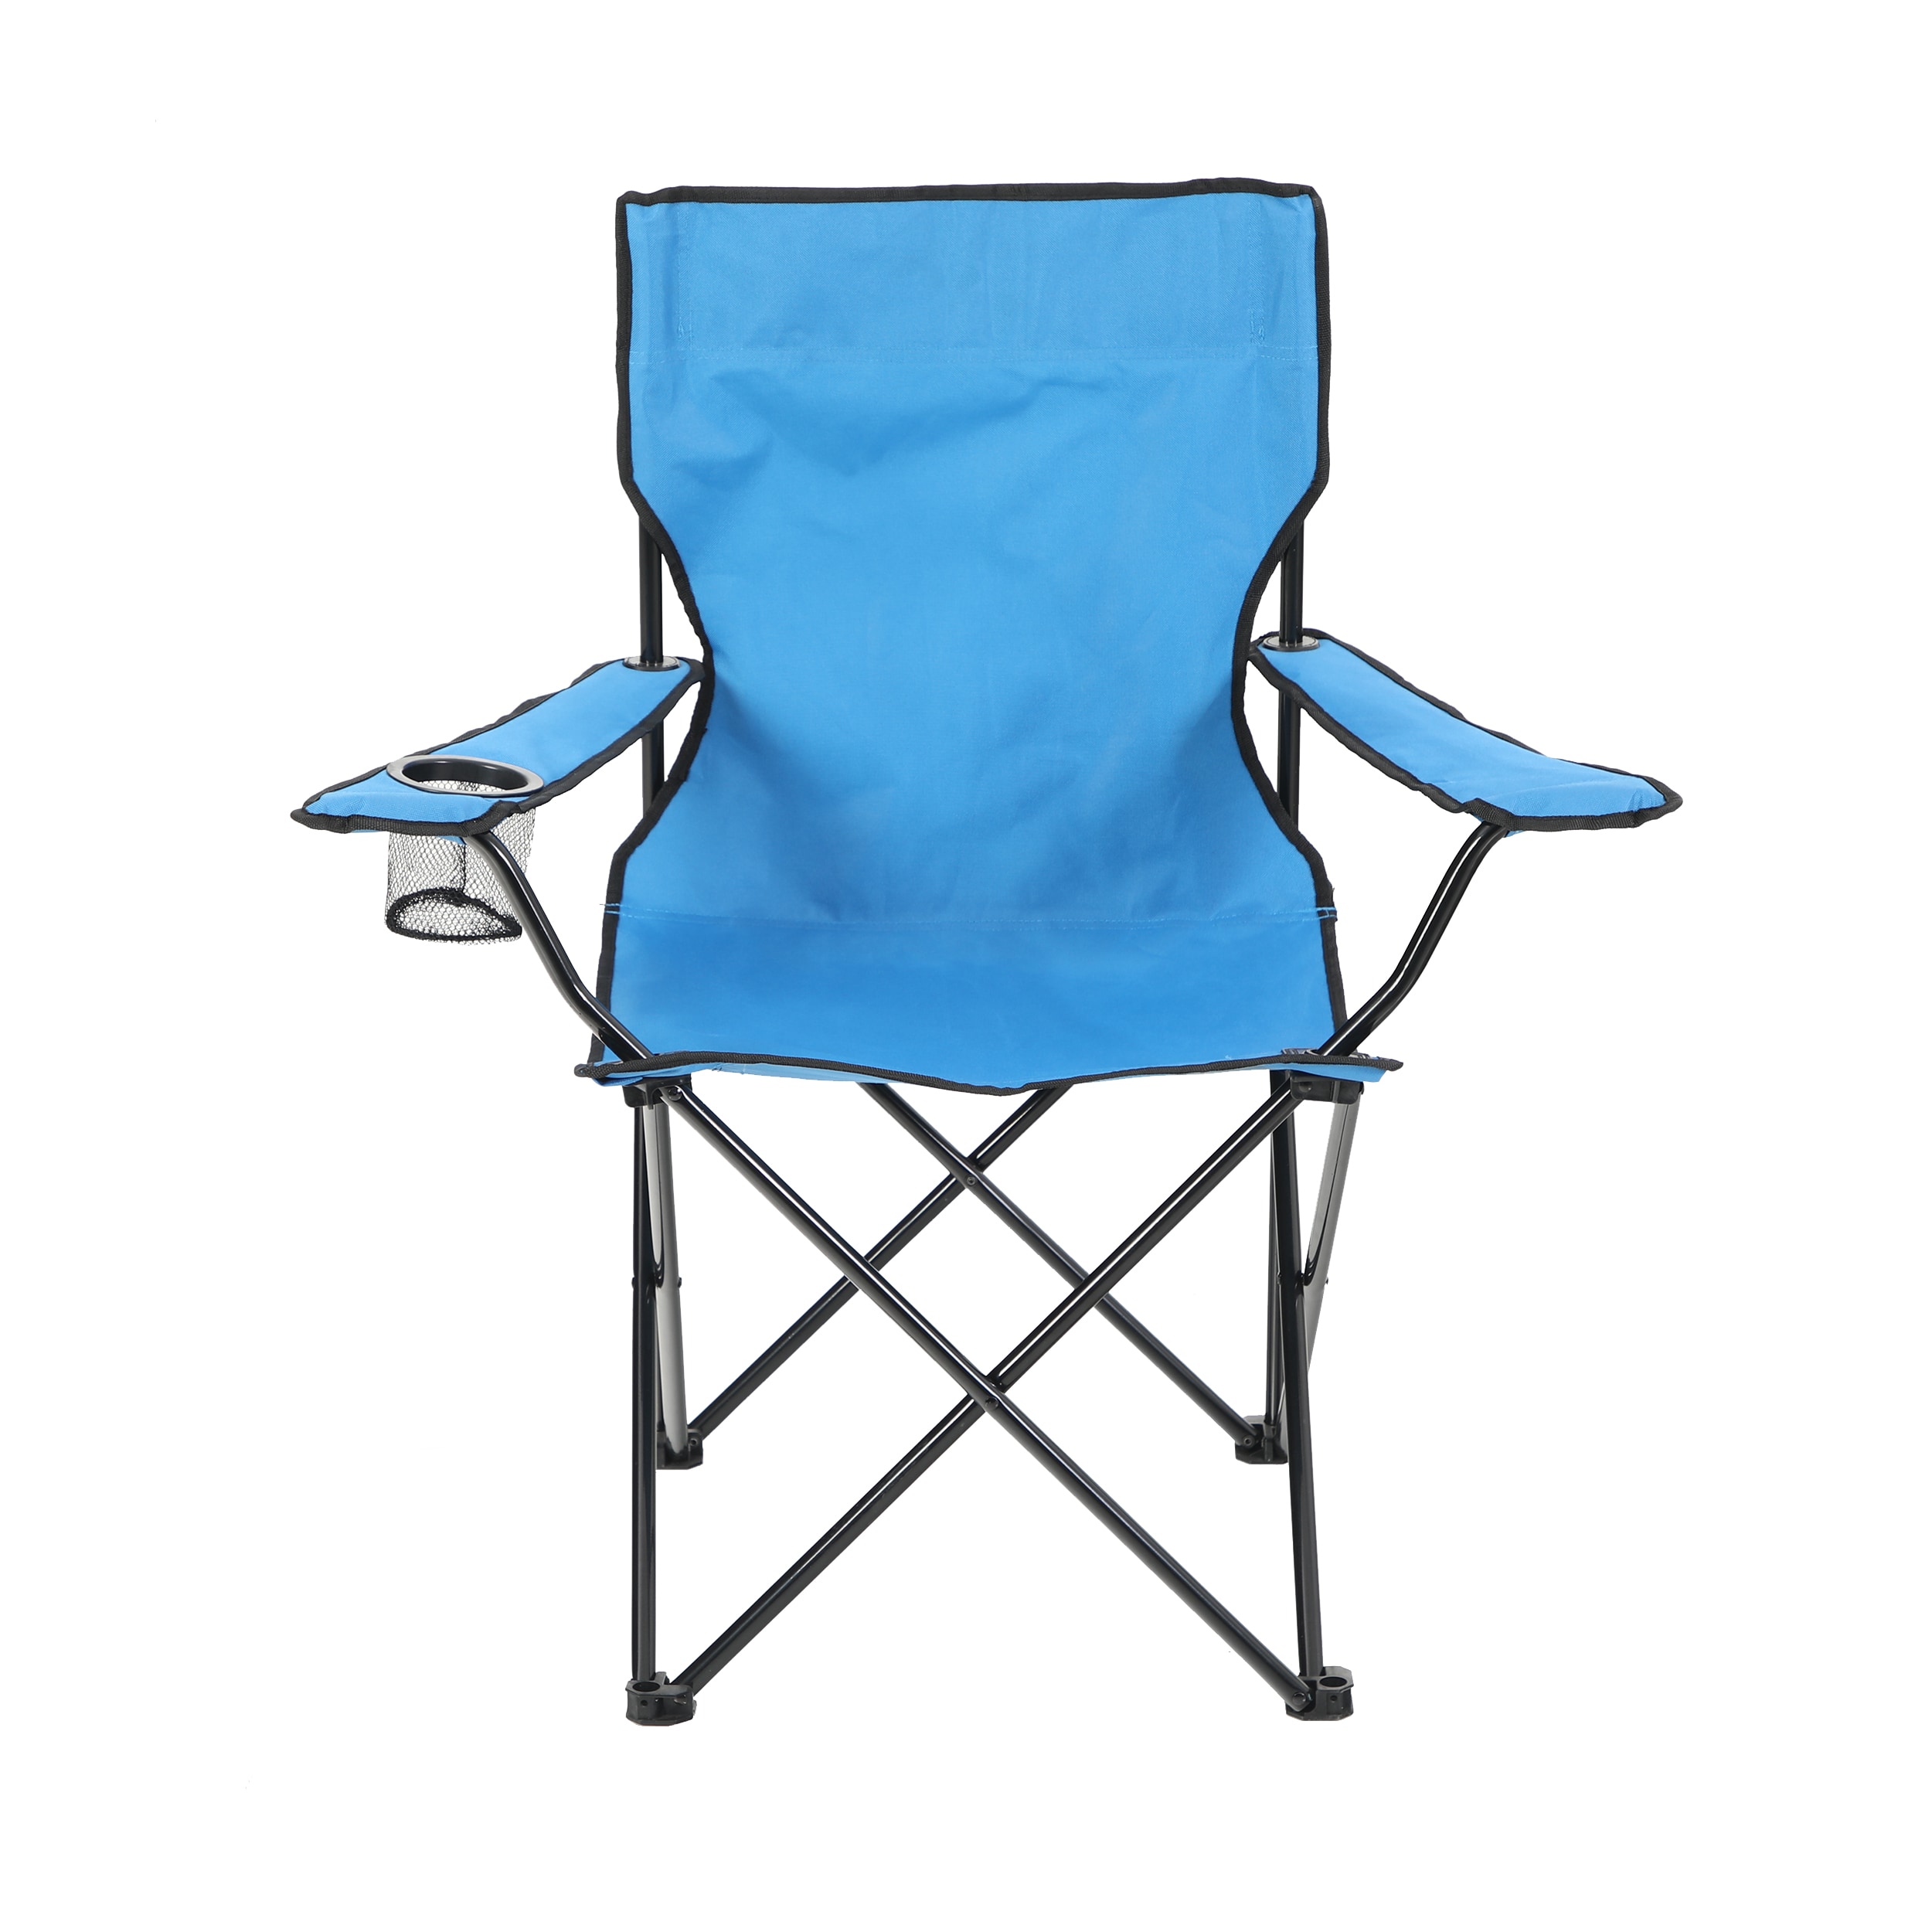 Buy Lightweight Folding Camping Chair From KingCamp, 57% OFF